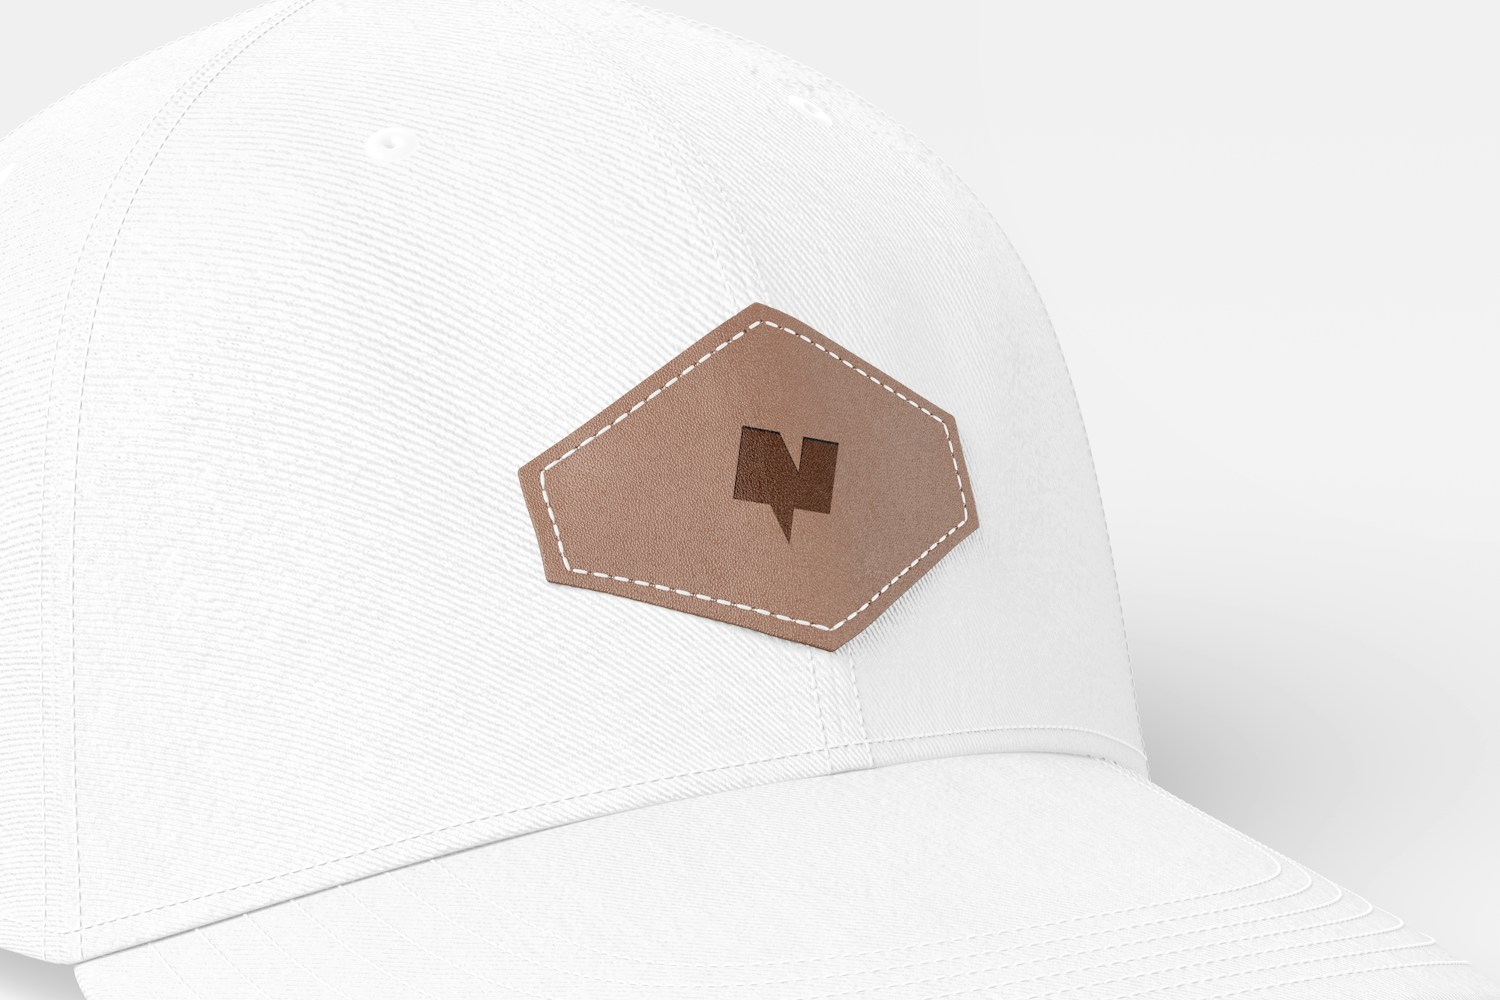 Hexagonal Leather Tags on Cap Mockup, Close Up